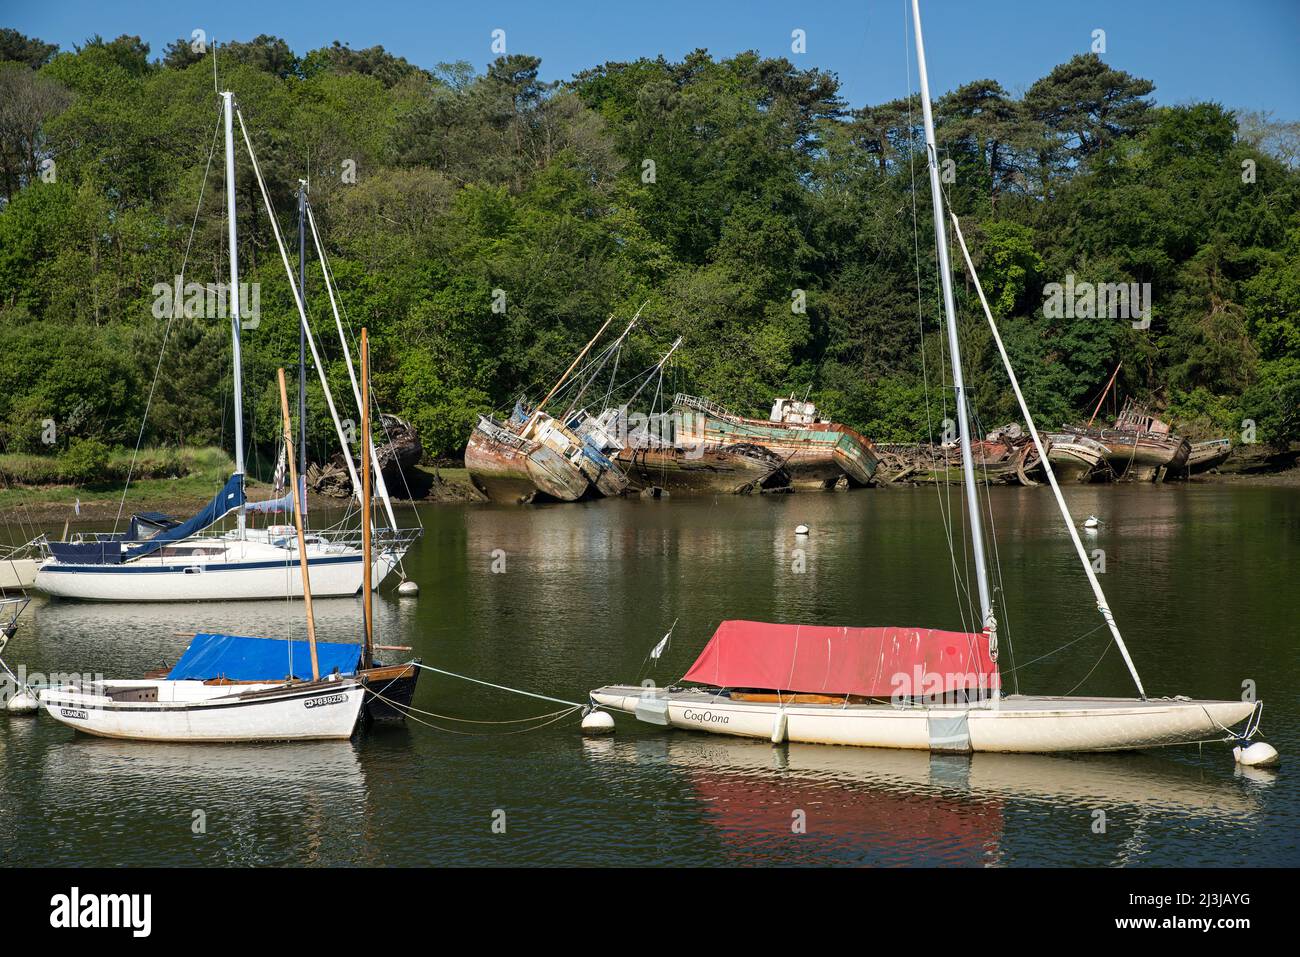 Douarnenez, sailboats and shipwrecks in the historic port of Port-Rhu, France, Brittany, Finistère department. Stock Photo